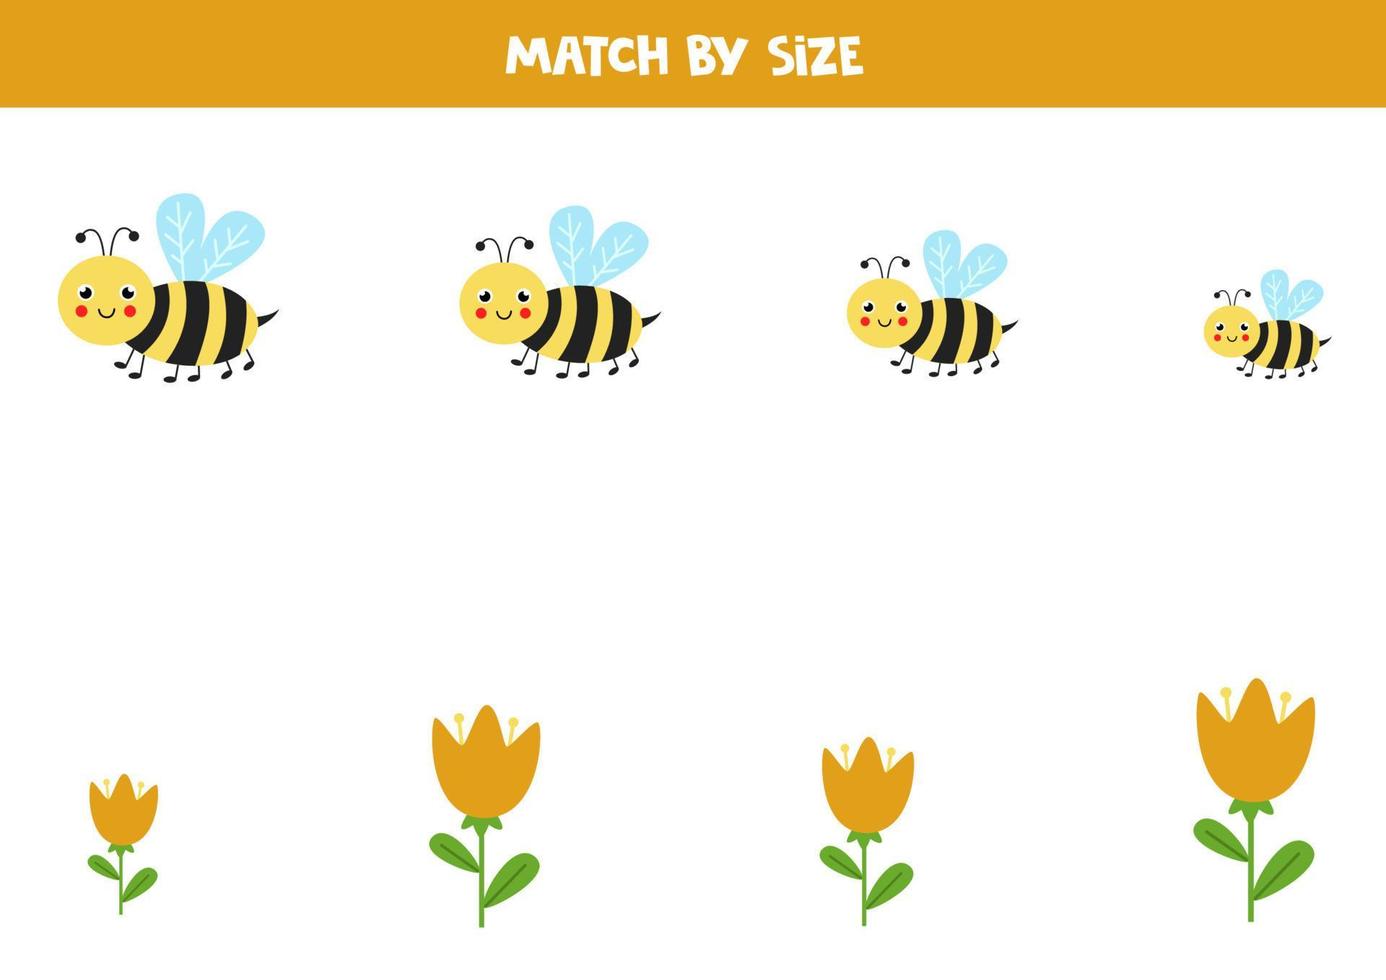 Matching game for preschool kids. Match bees and flowers by size. vector